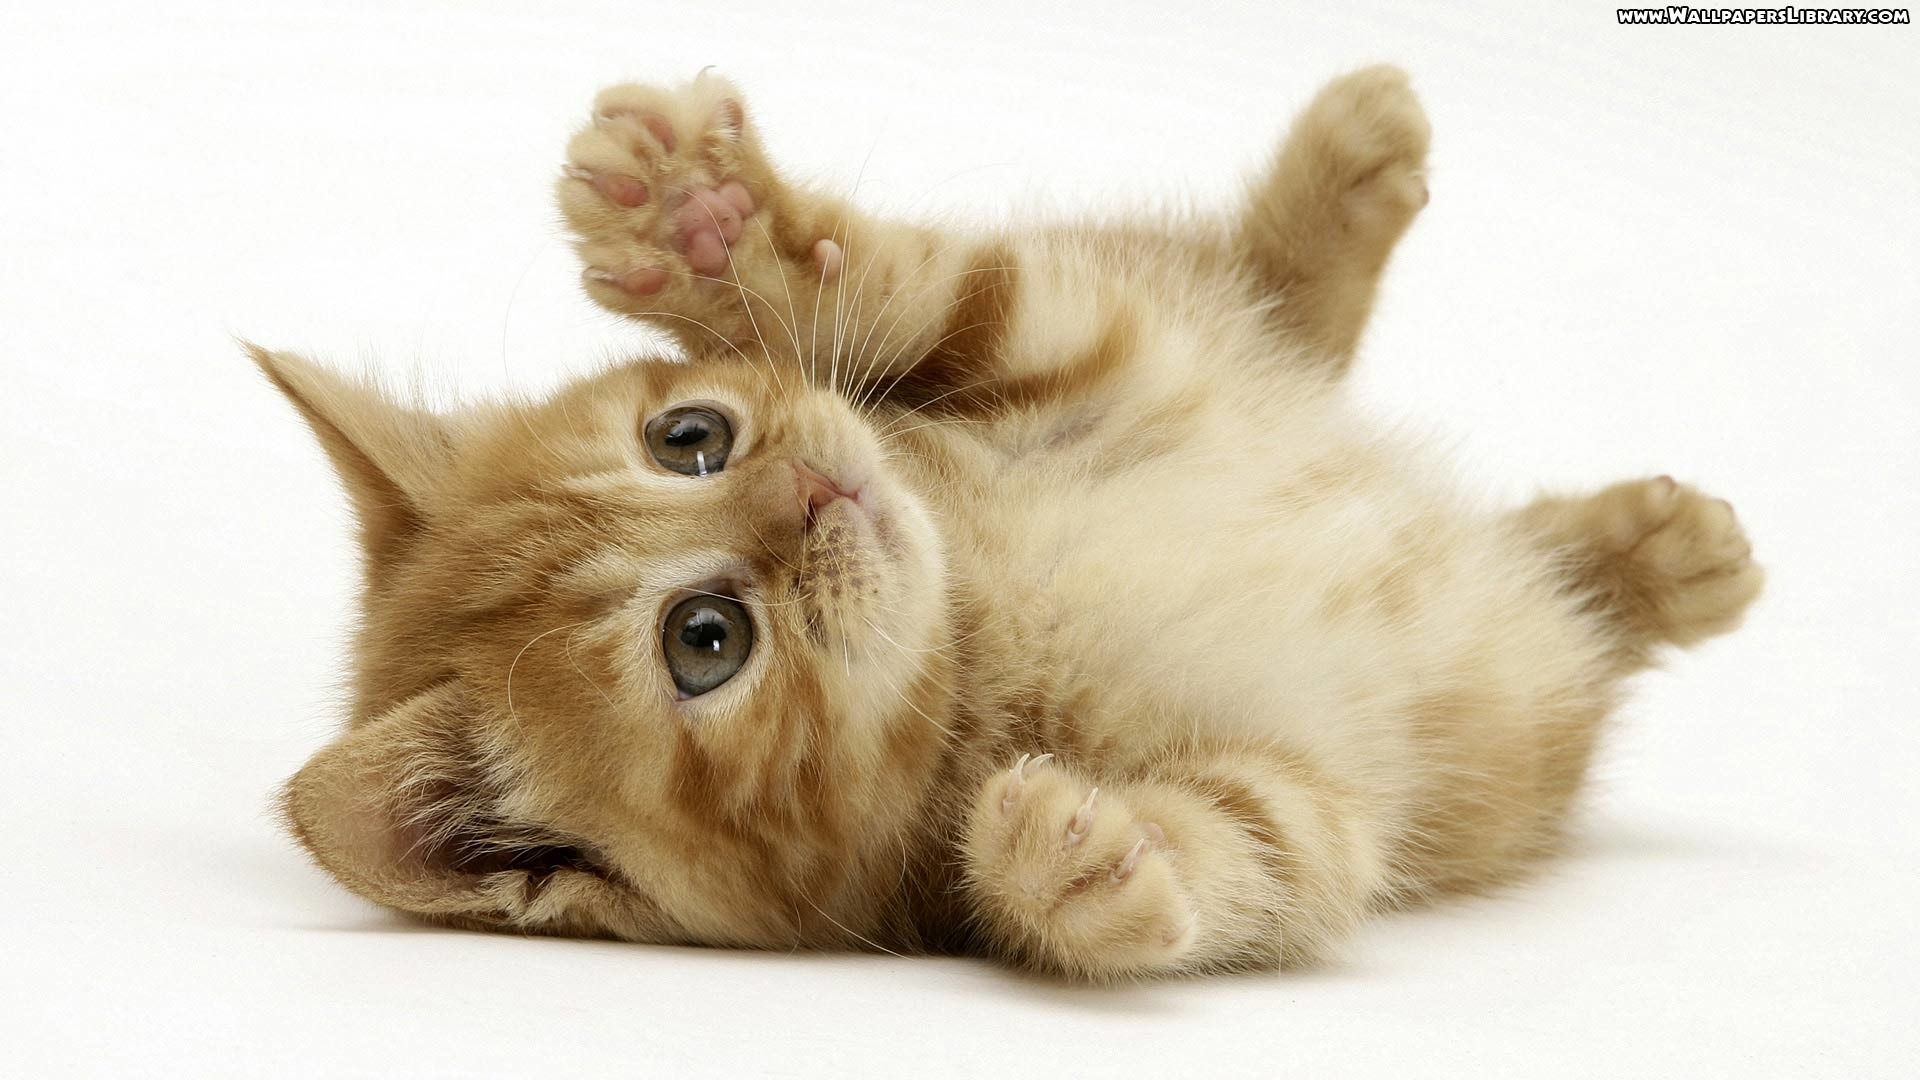 Cute Kitten Wallpaper Android Apps on Google Play